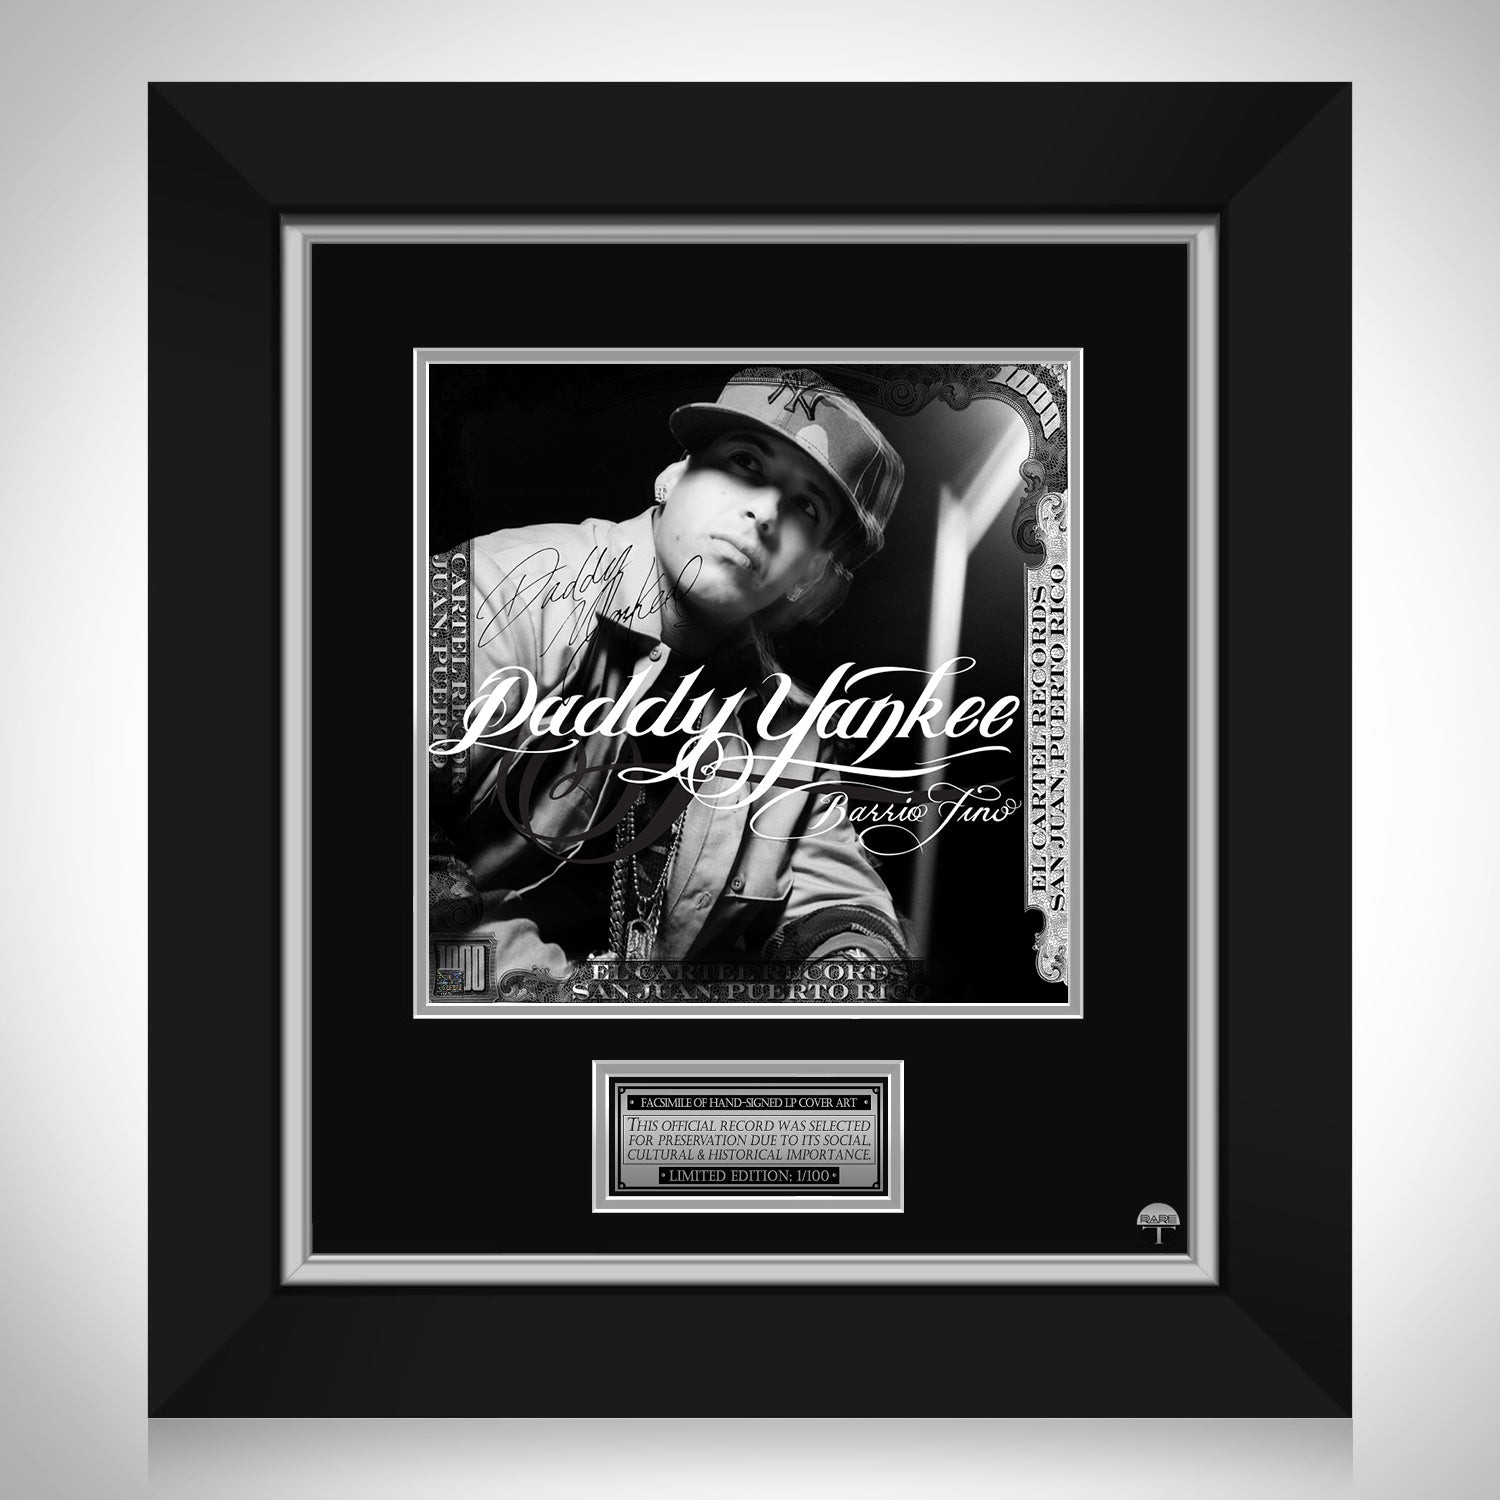 Daddy Yankee - Barrio Fino LP Cover Limited Signature Edition Custom Frame